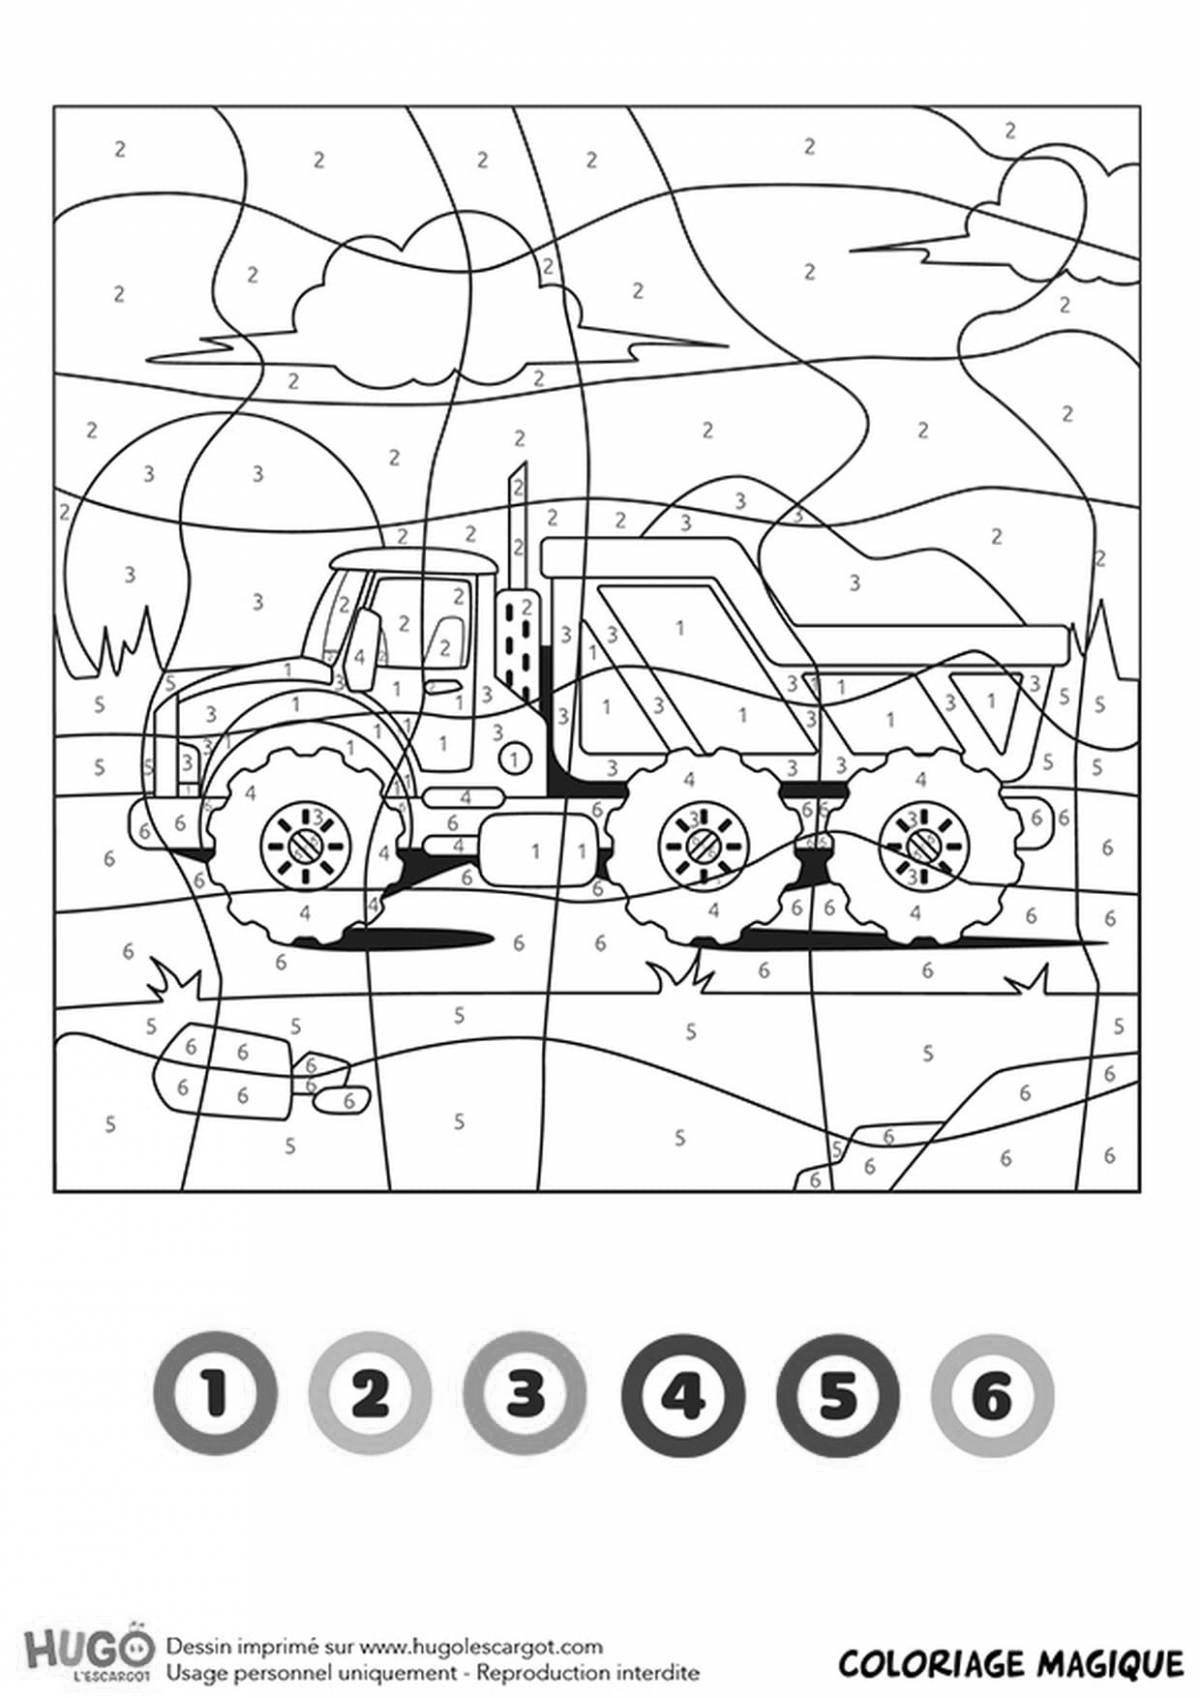 Coloring book with bright truck number